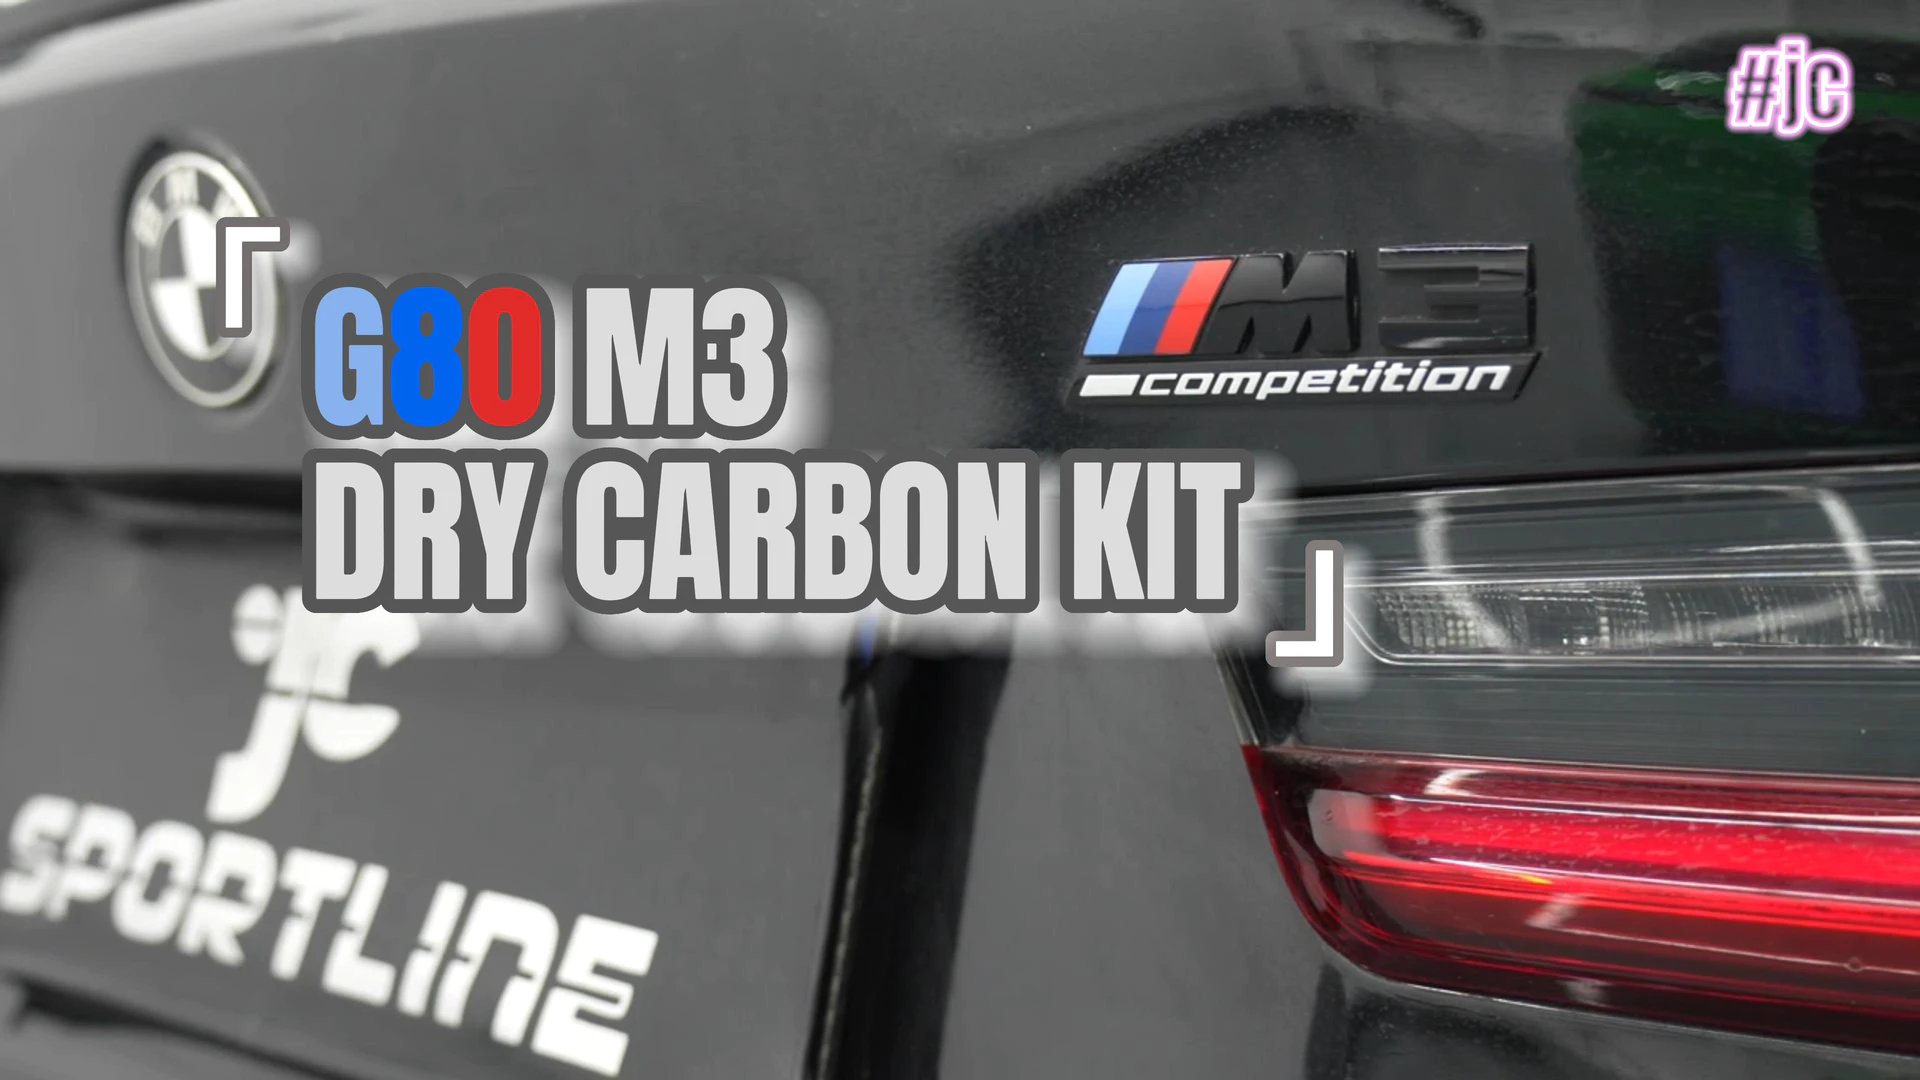 Looking to upgrade the look of your BMW G80 M3?